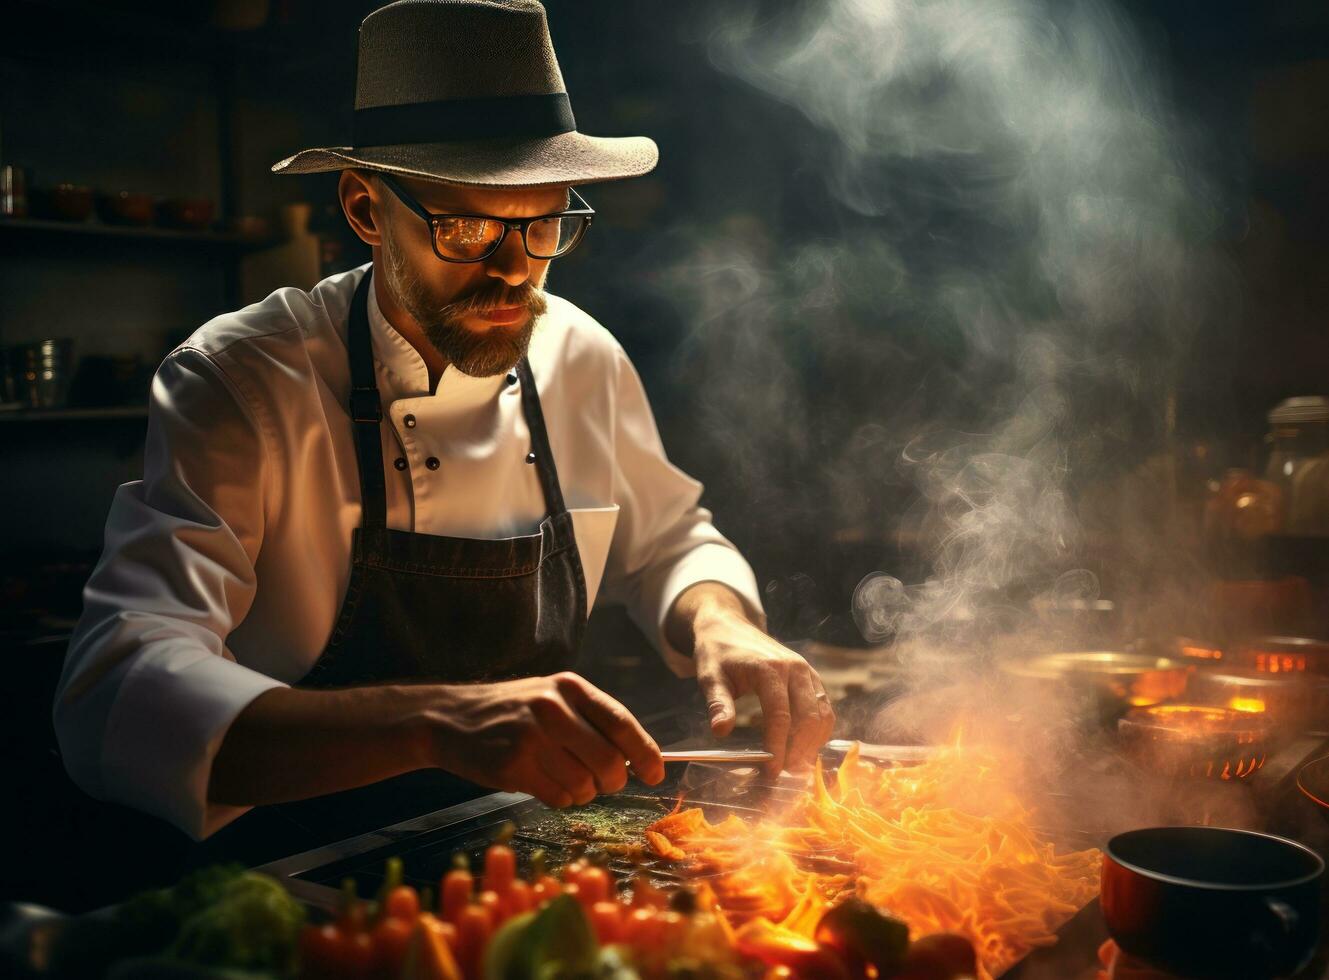 Chef in hat and glasses preparing food grilled in a pan photo